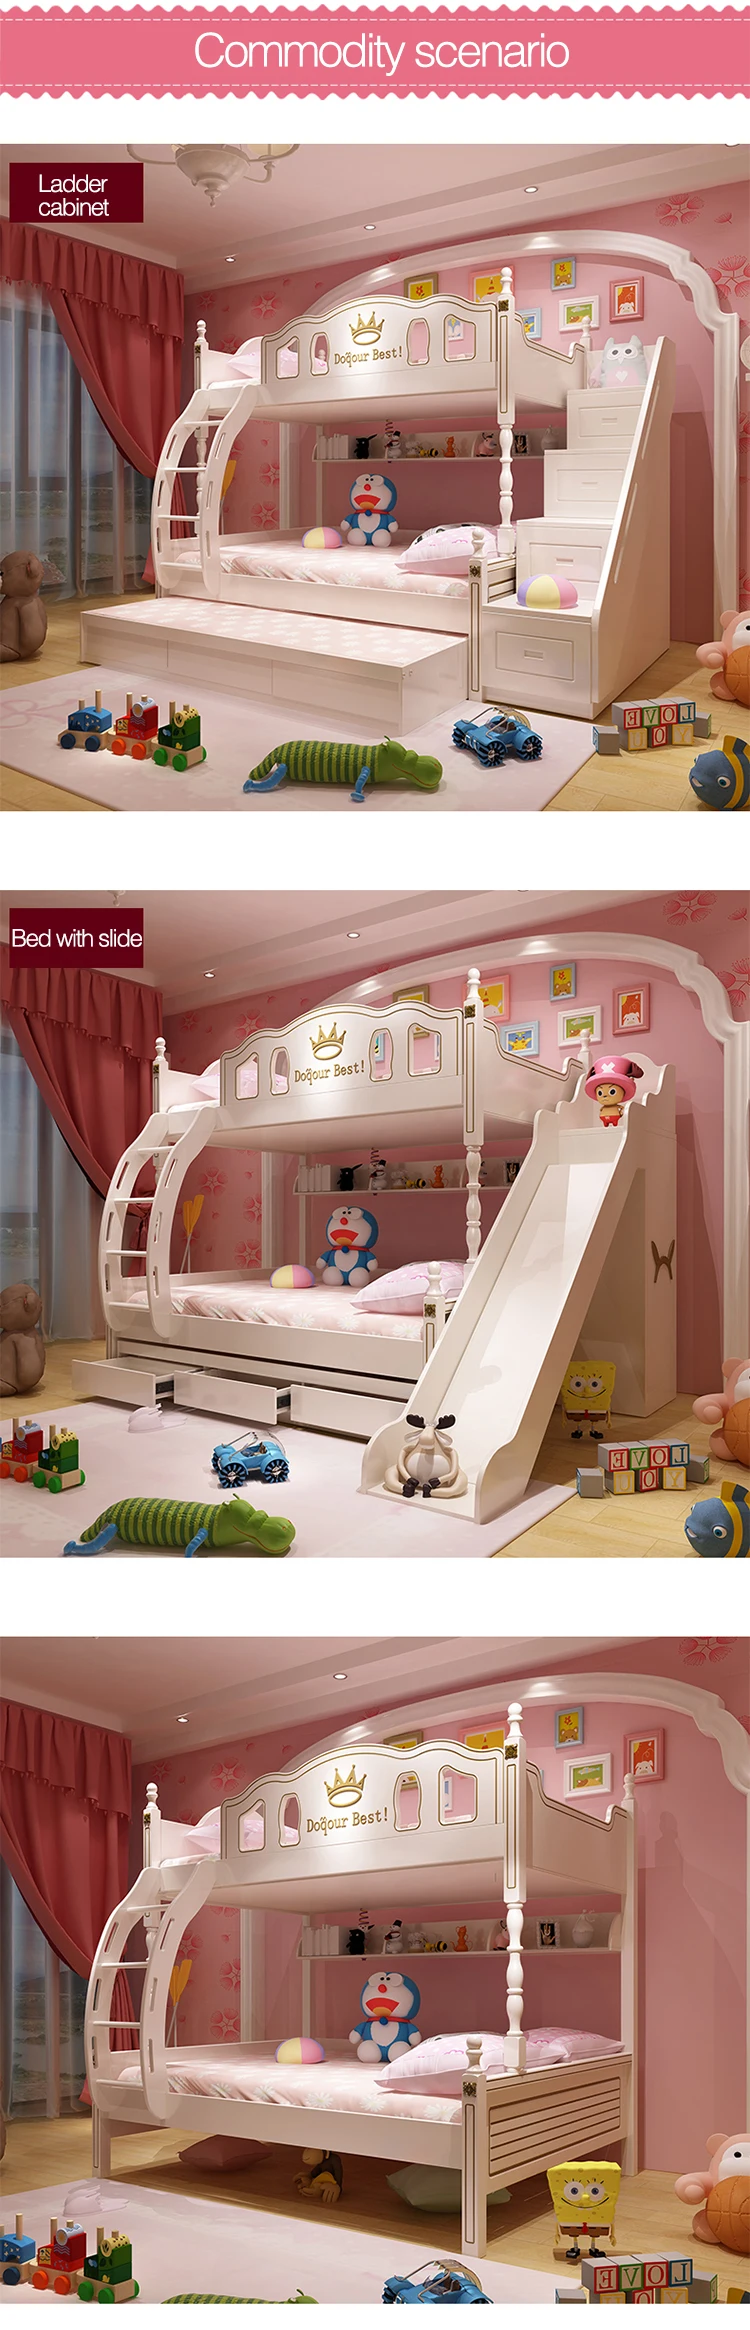 Hot Sale Children Set Princess Bunk Bed With Slide Buy Children Bunk Bed With Slide Bunk Bed Set Hot Sale Bunk Bed Product On Alibaba Com